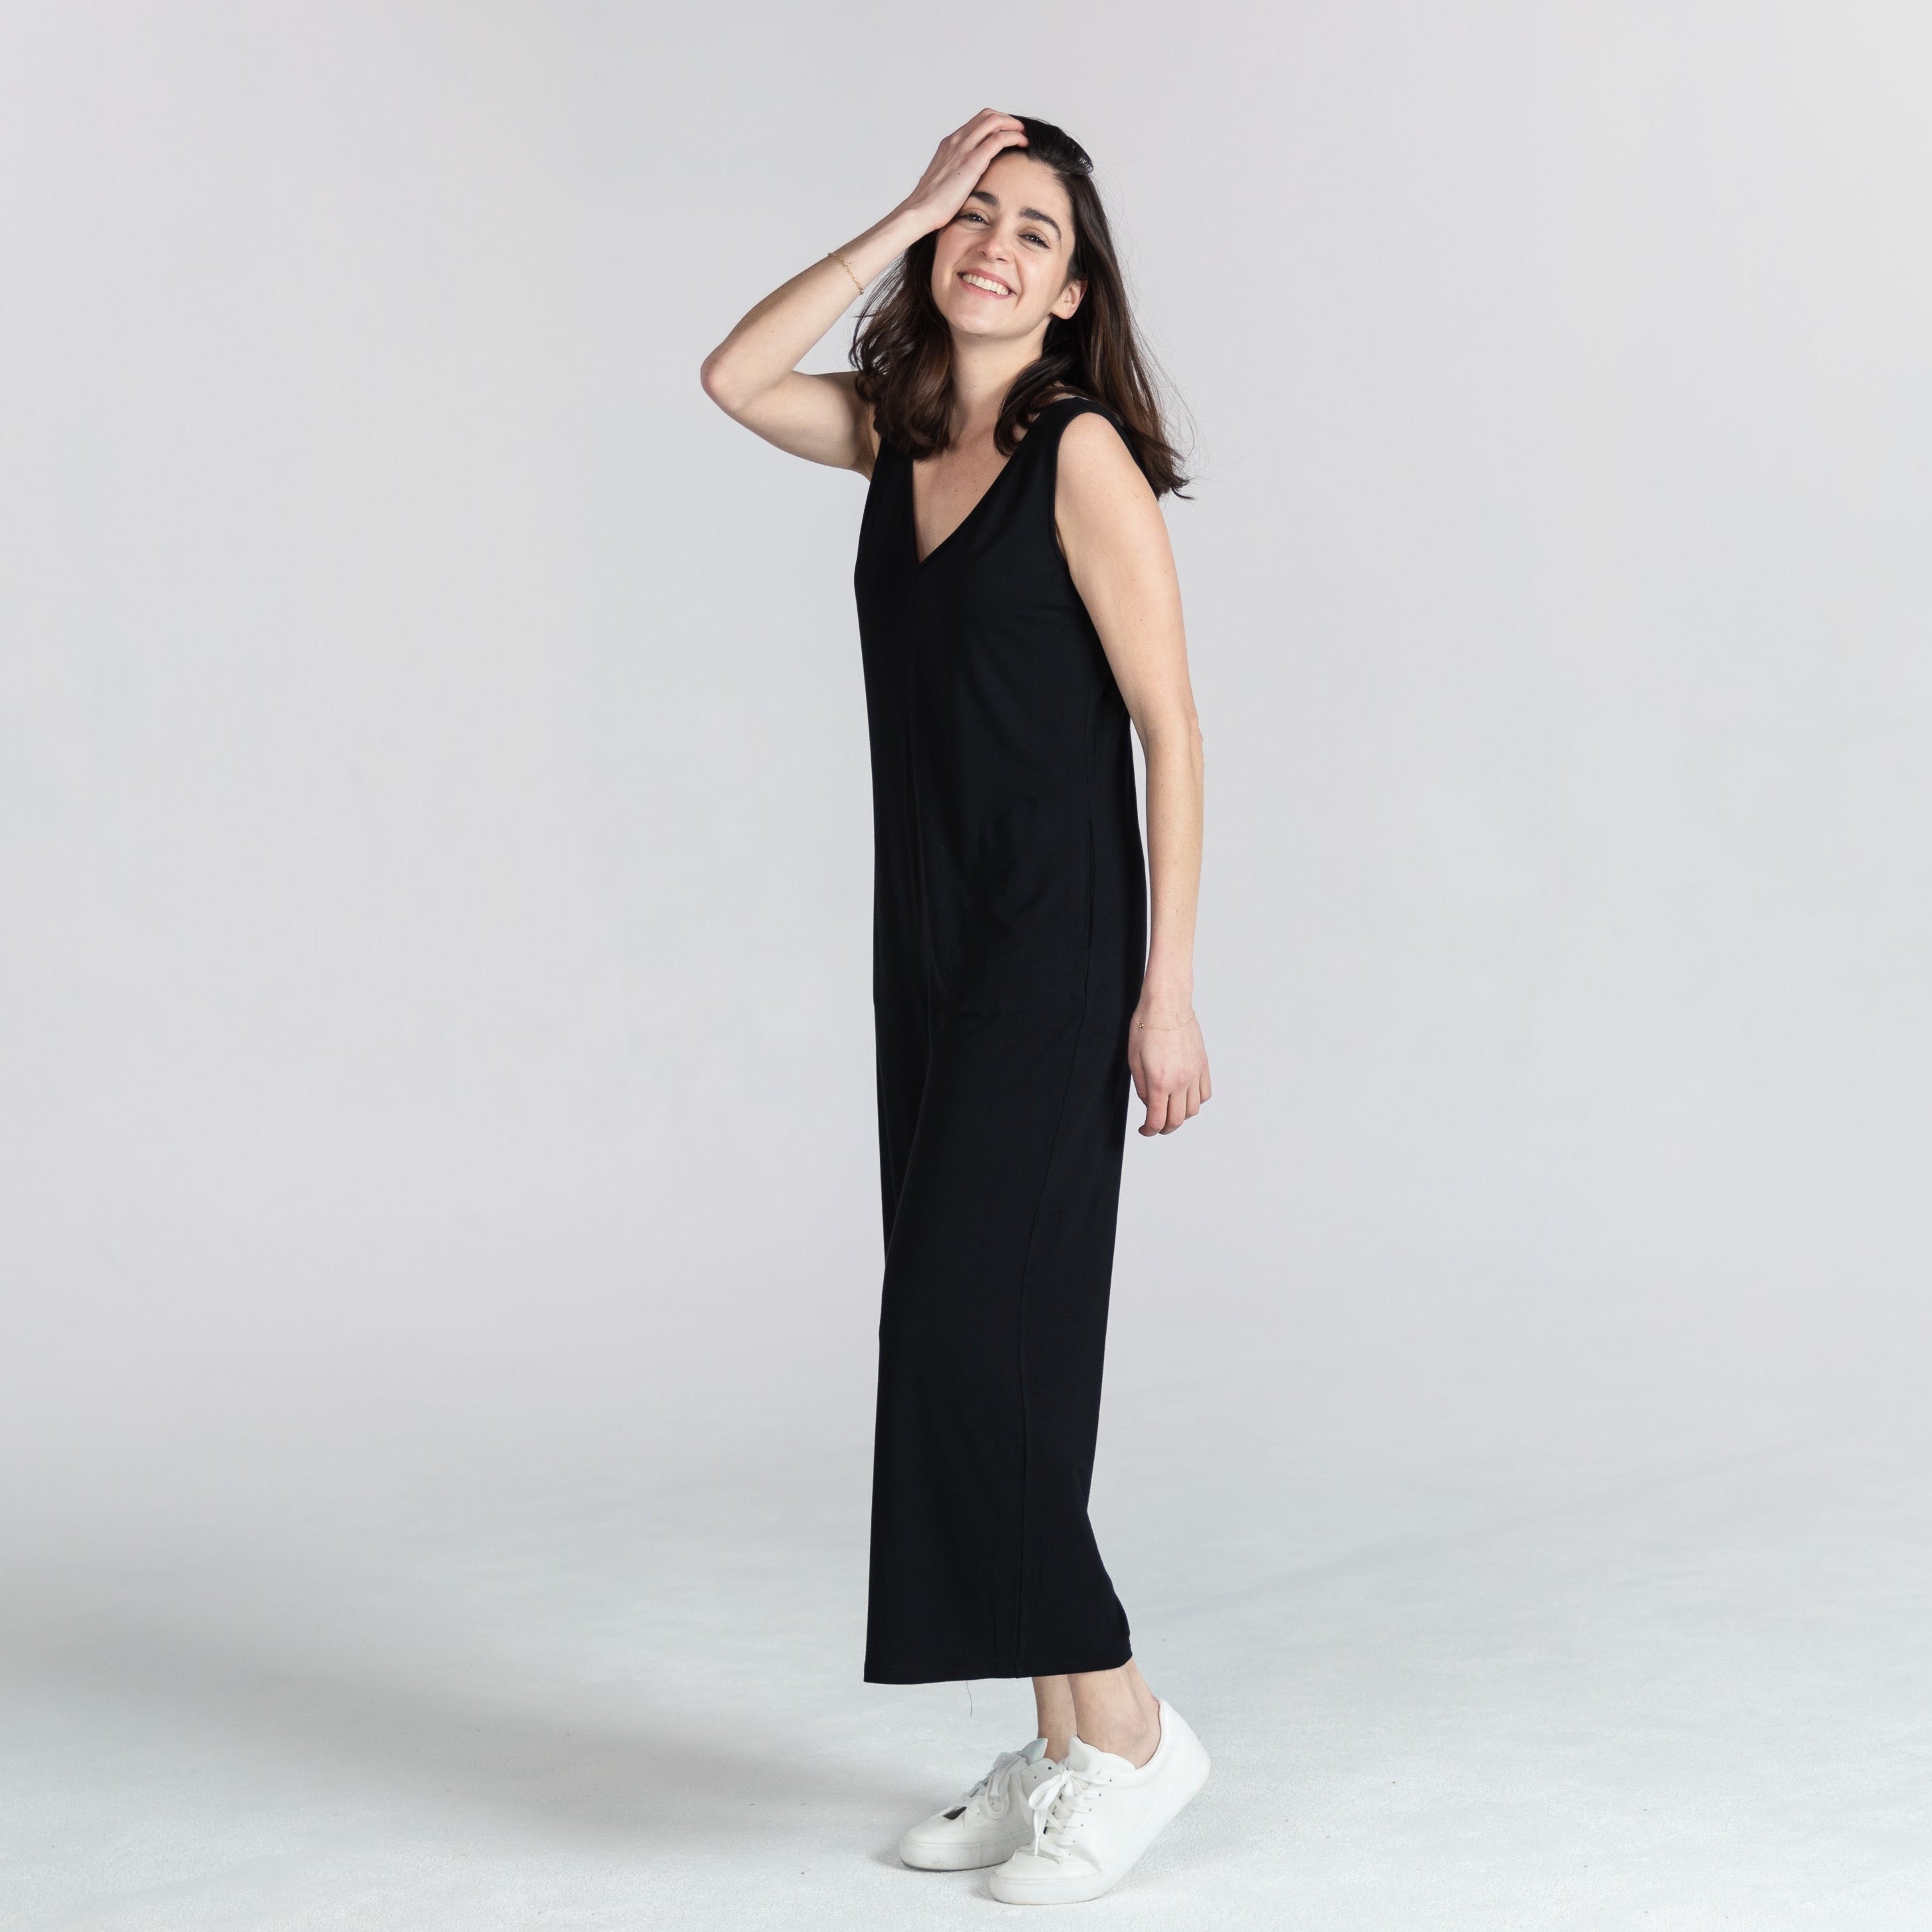 The Anywear Jumpsuit in Onyx